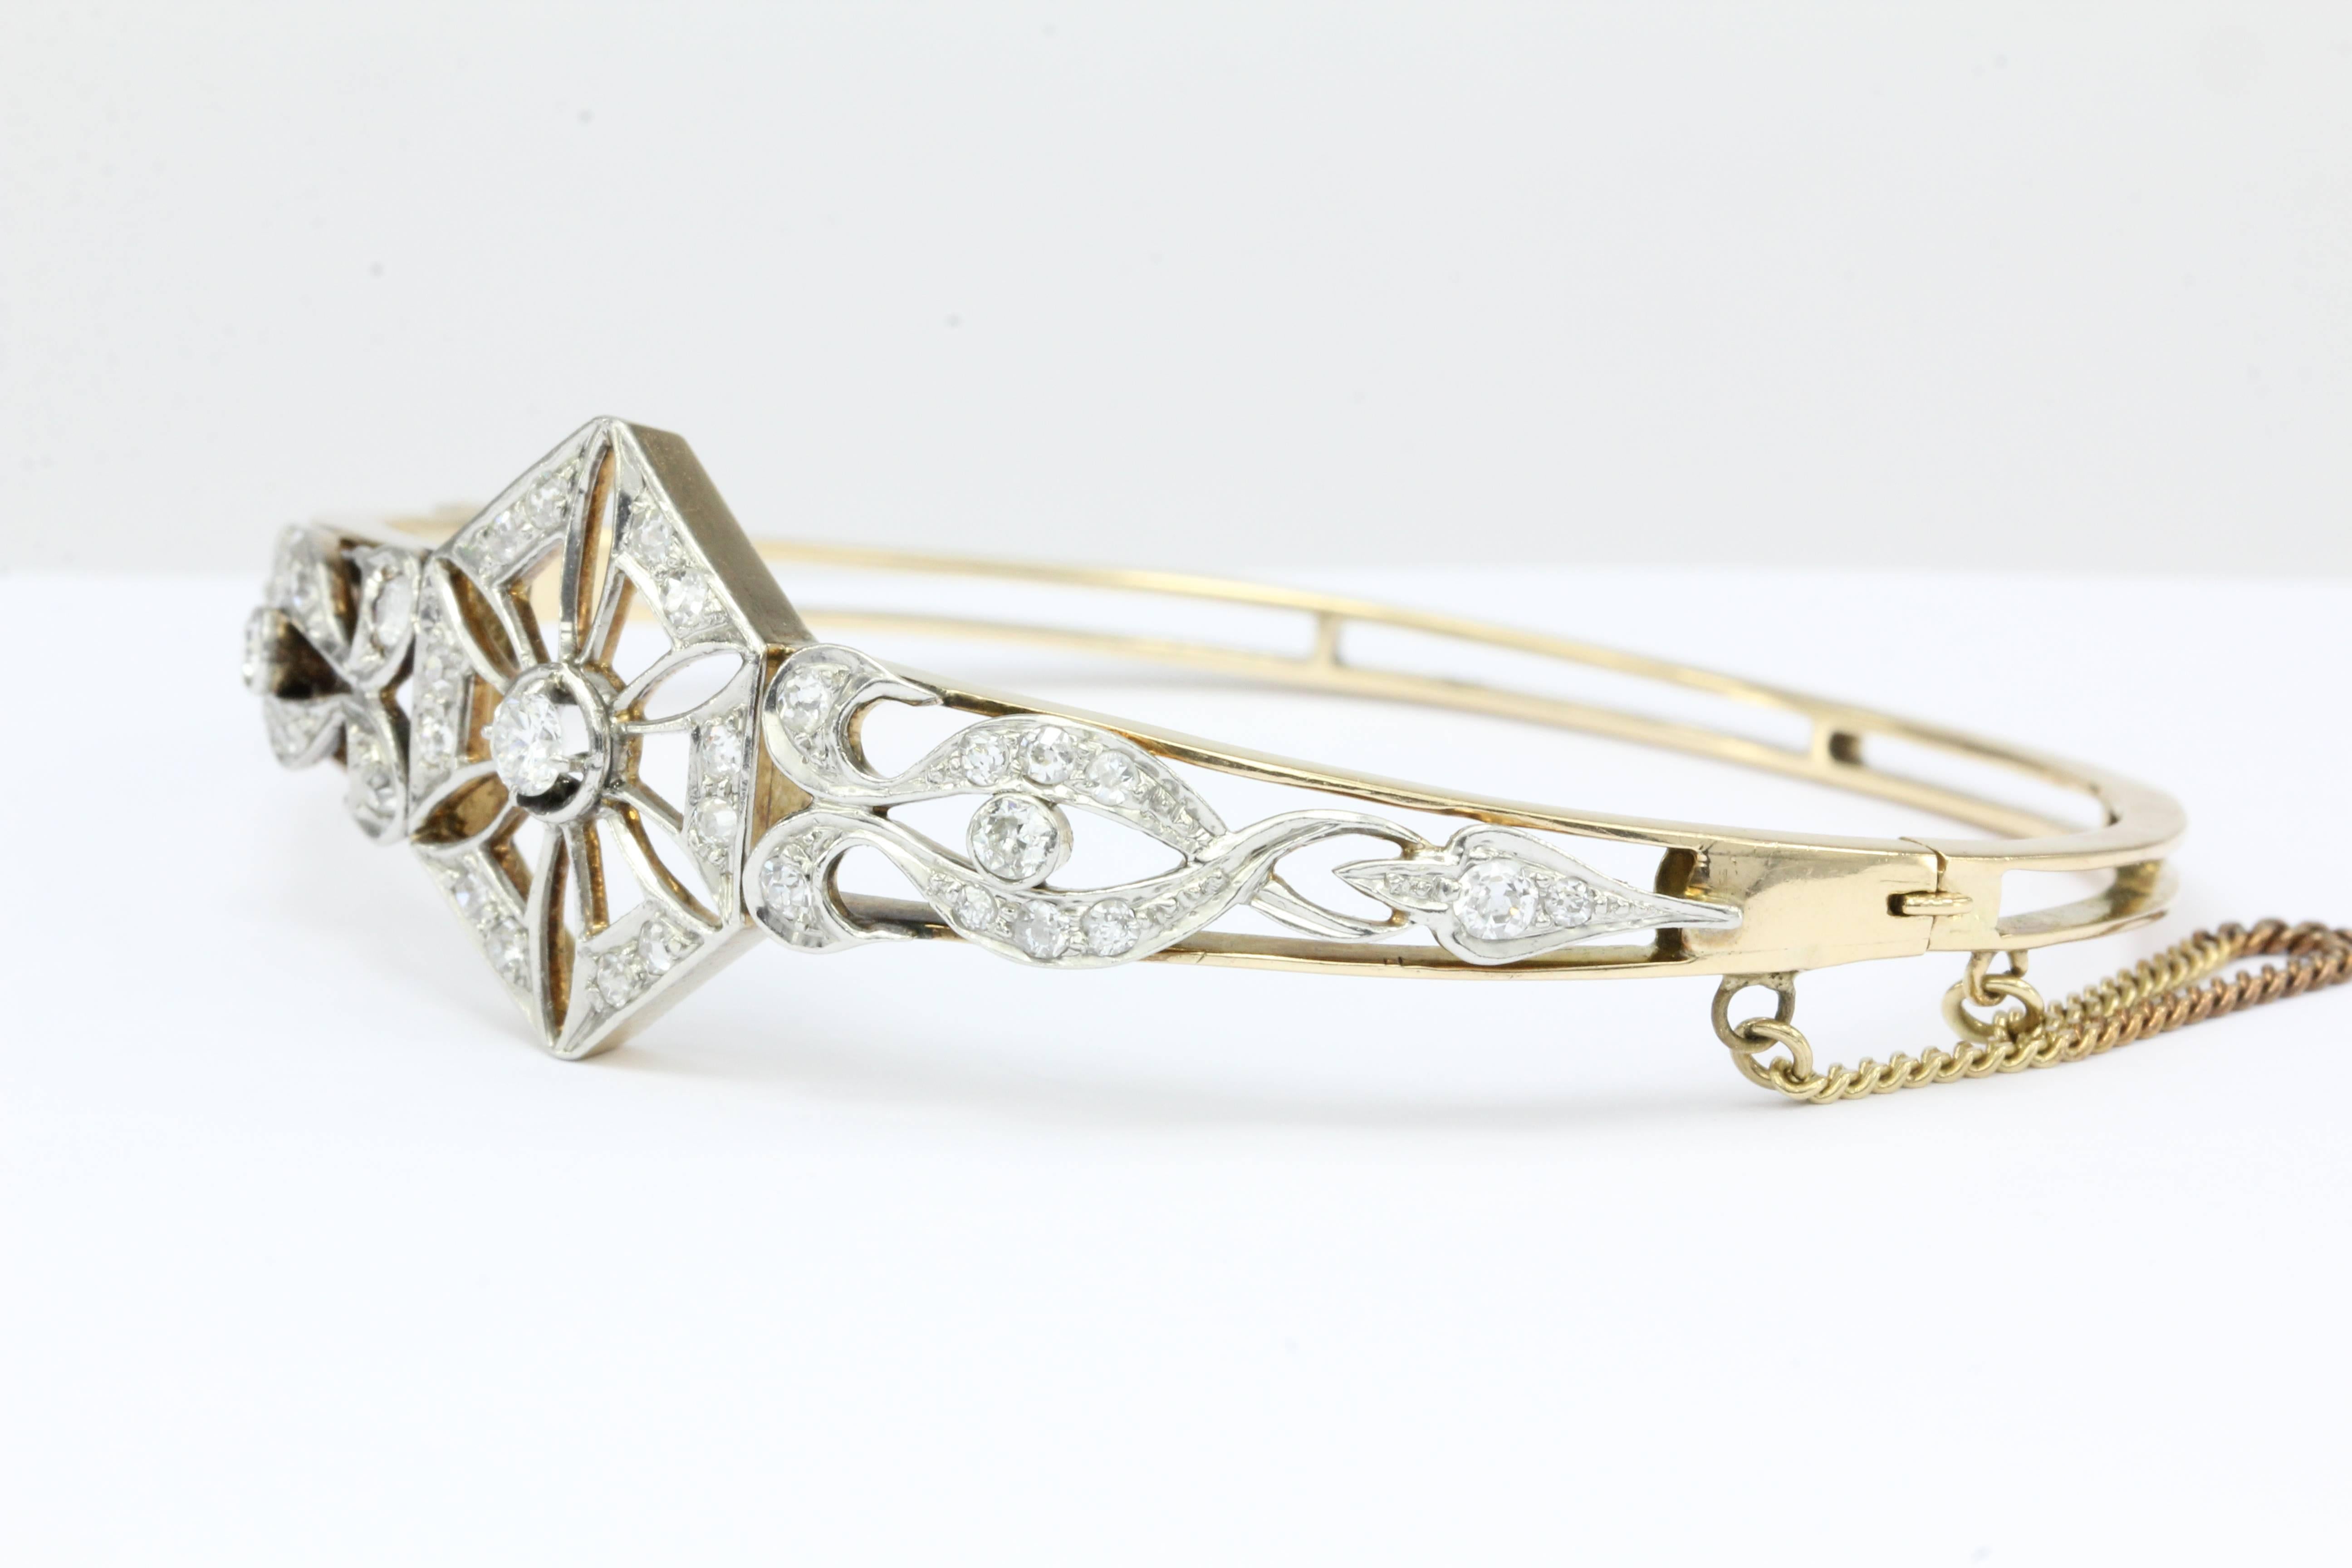  Art Deco 14K Yellow Gold Old European Cut Diamond Bangle Bracelet c.1920

A delicate art deco sparkling diamond snowflake appears to be tossed by opposing east & west winds as this magical scene plays out atop this stunning bracelet. The piece